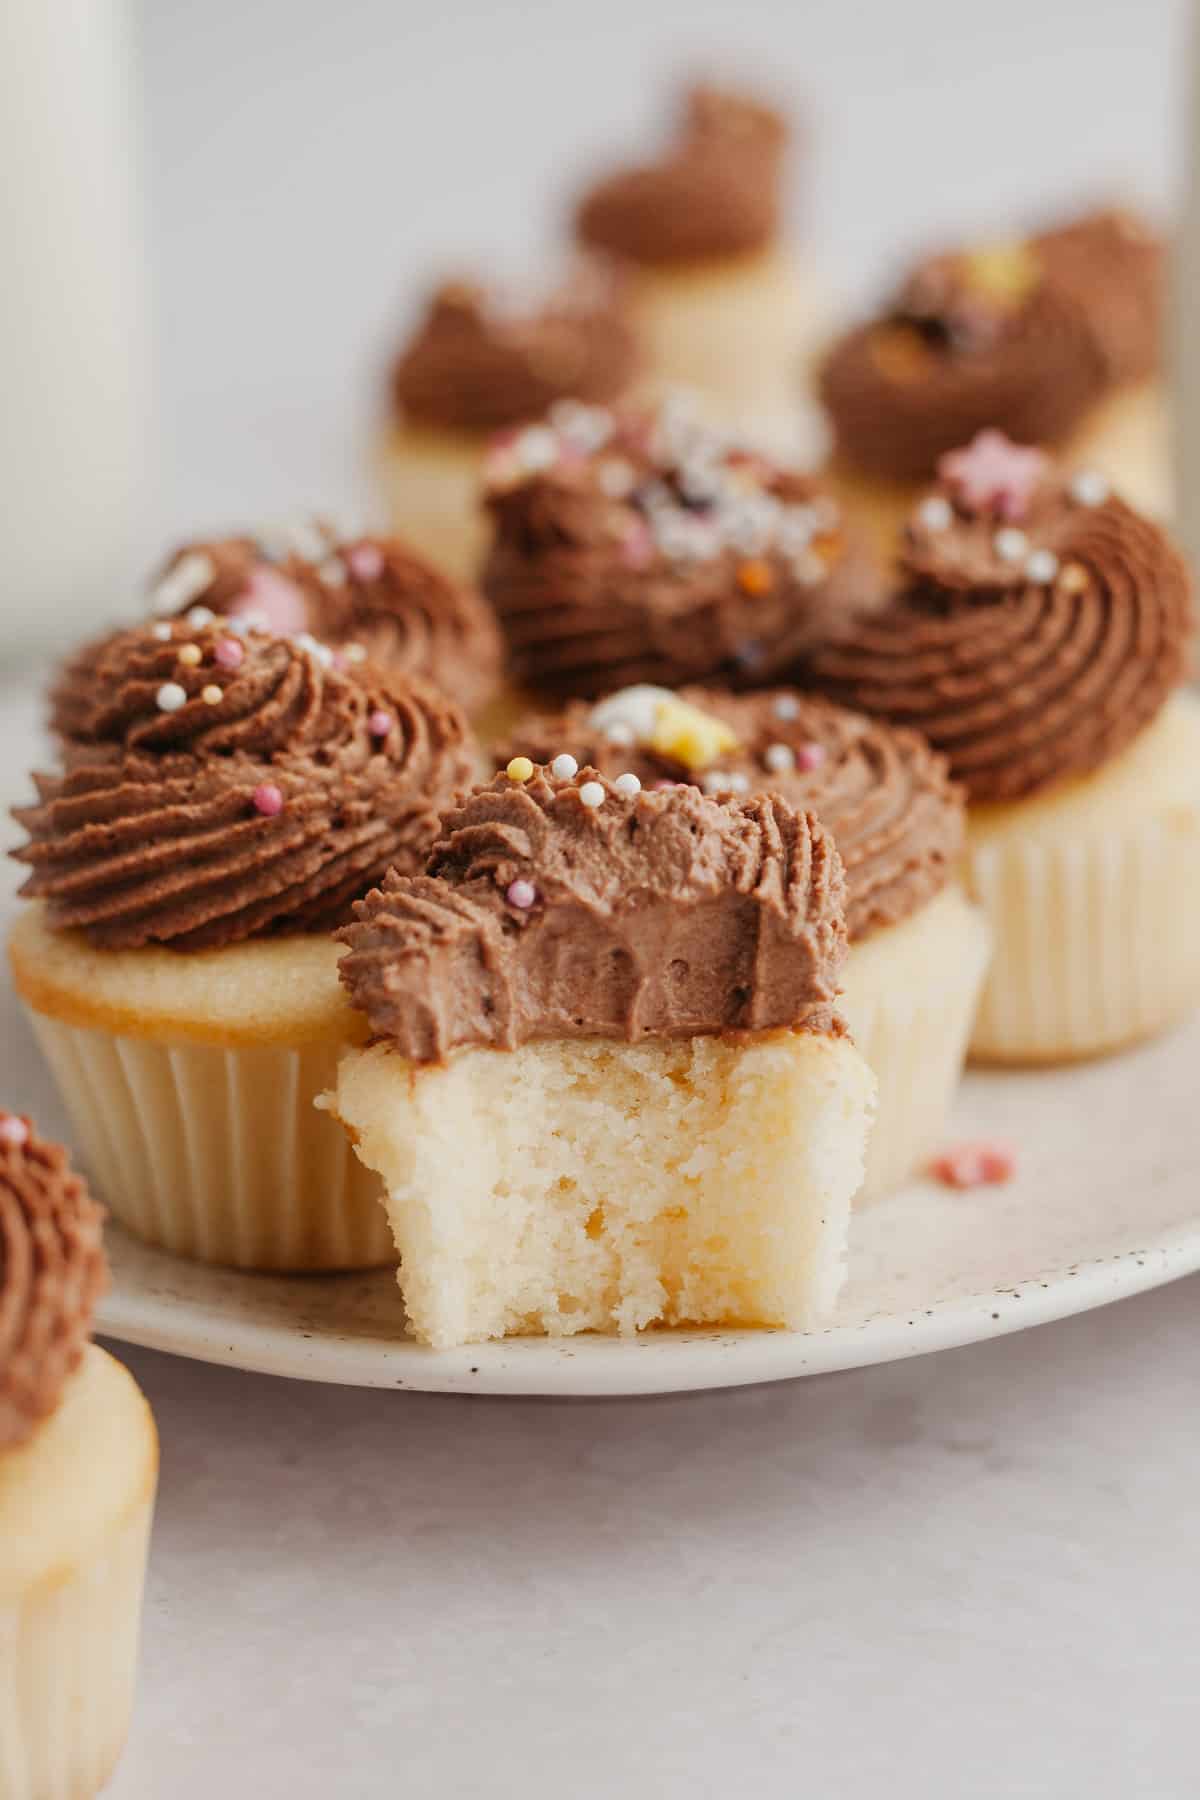 A close up of a mini vanilla cupcake with chocolate frosting, a bite has been taken out of it.